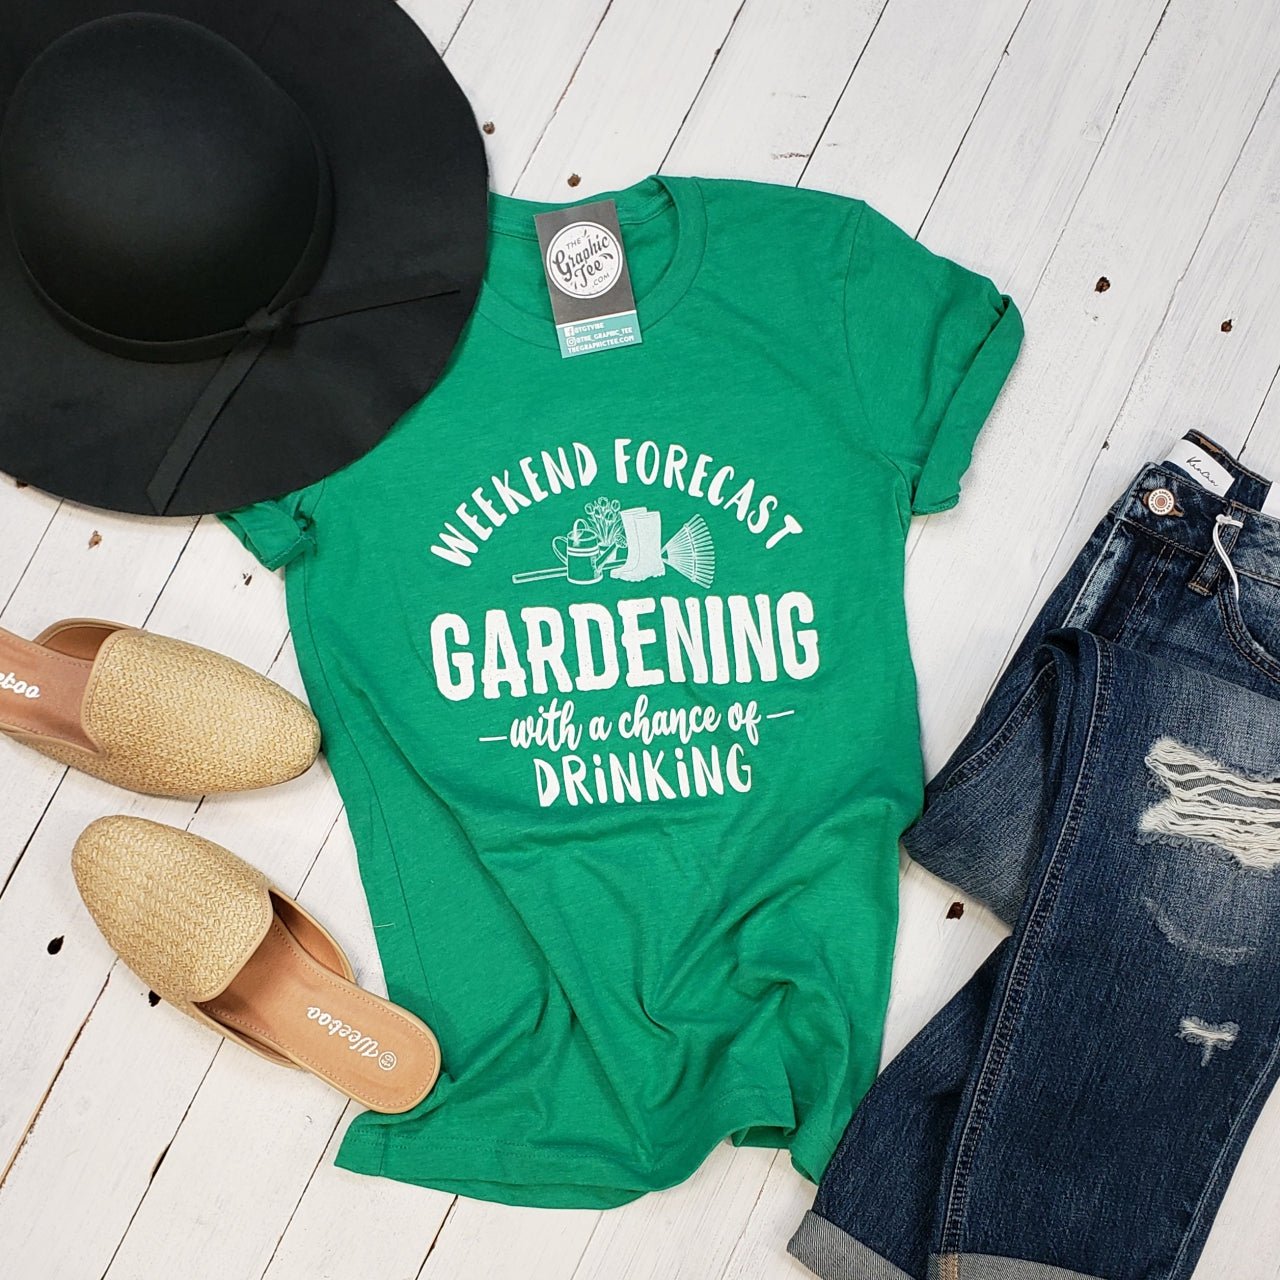 Weekend Forecast (Gardening With a Chance of Drinking) Tee - The Graphic Tee